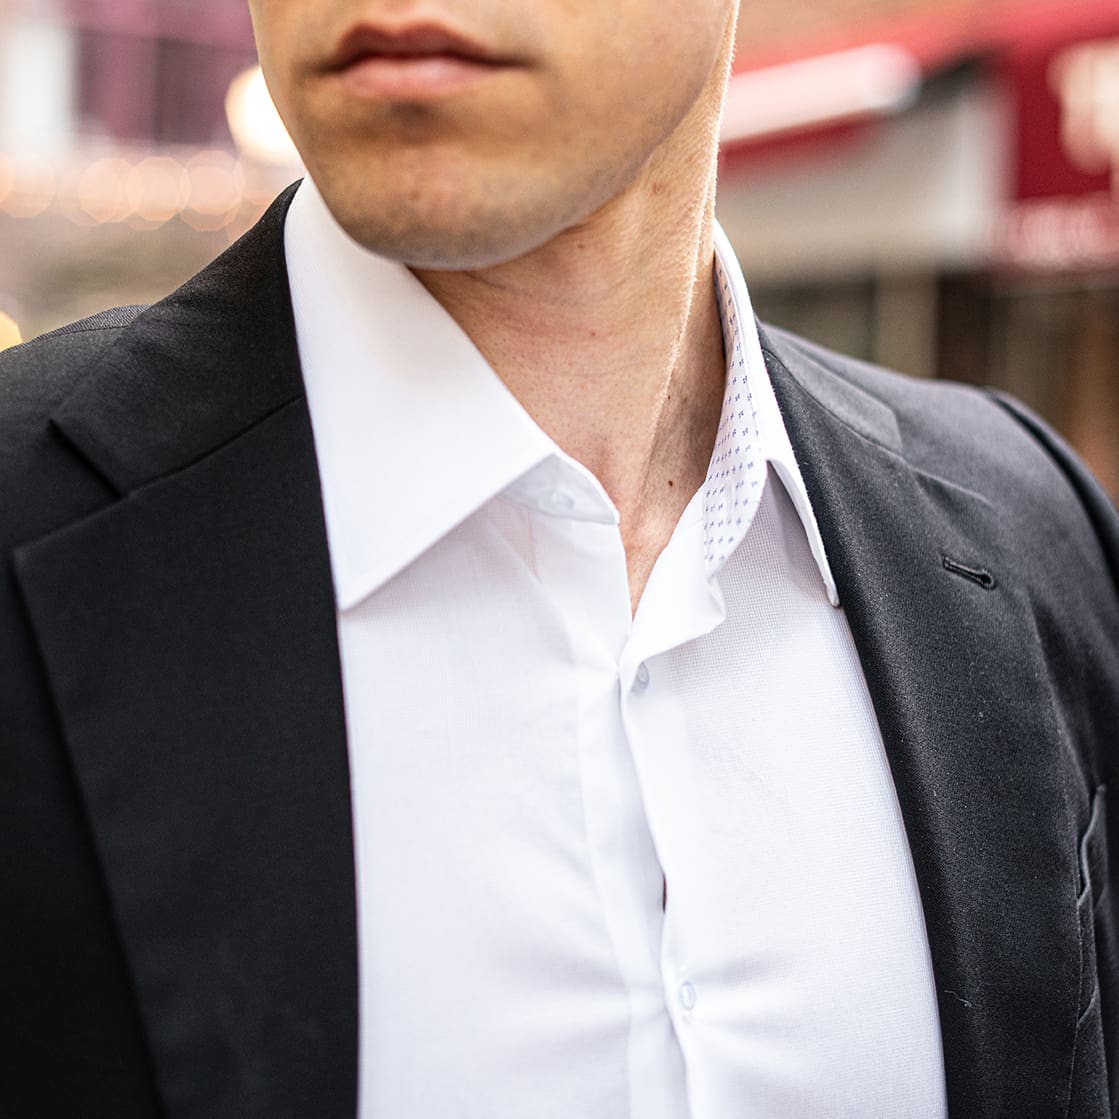 white collared shirt with black suit jacket